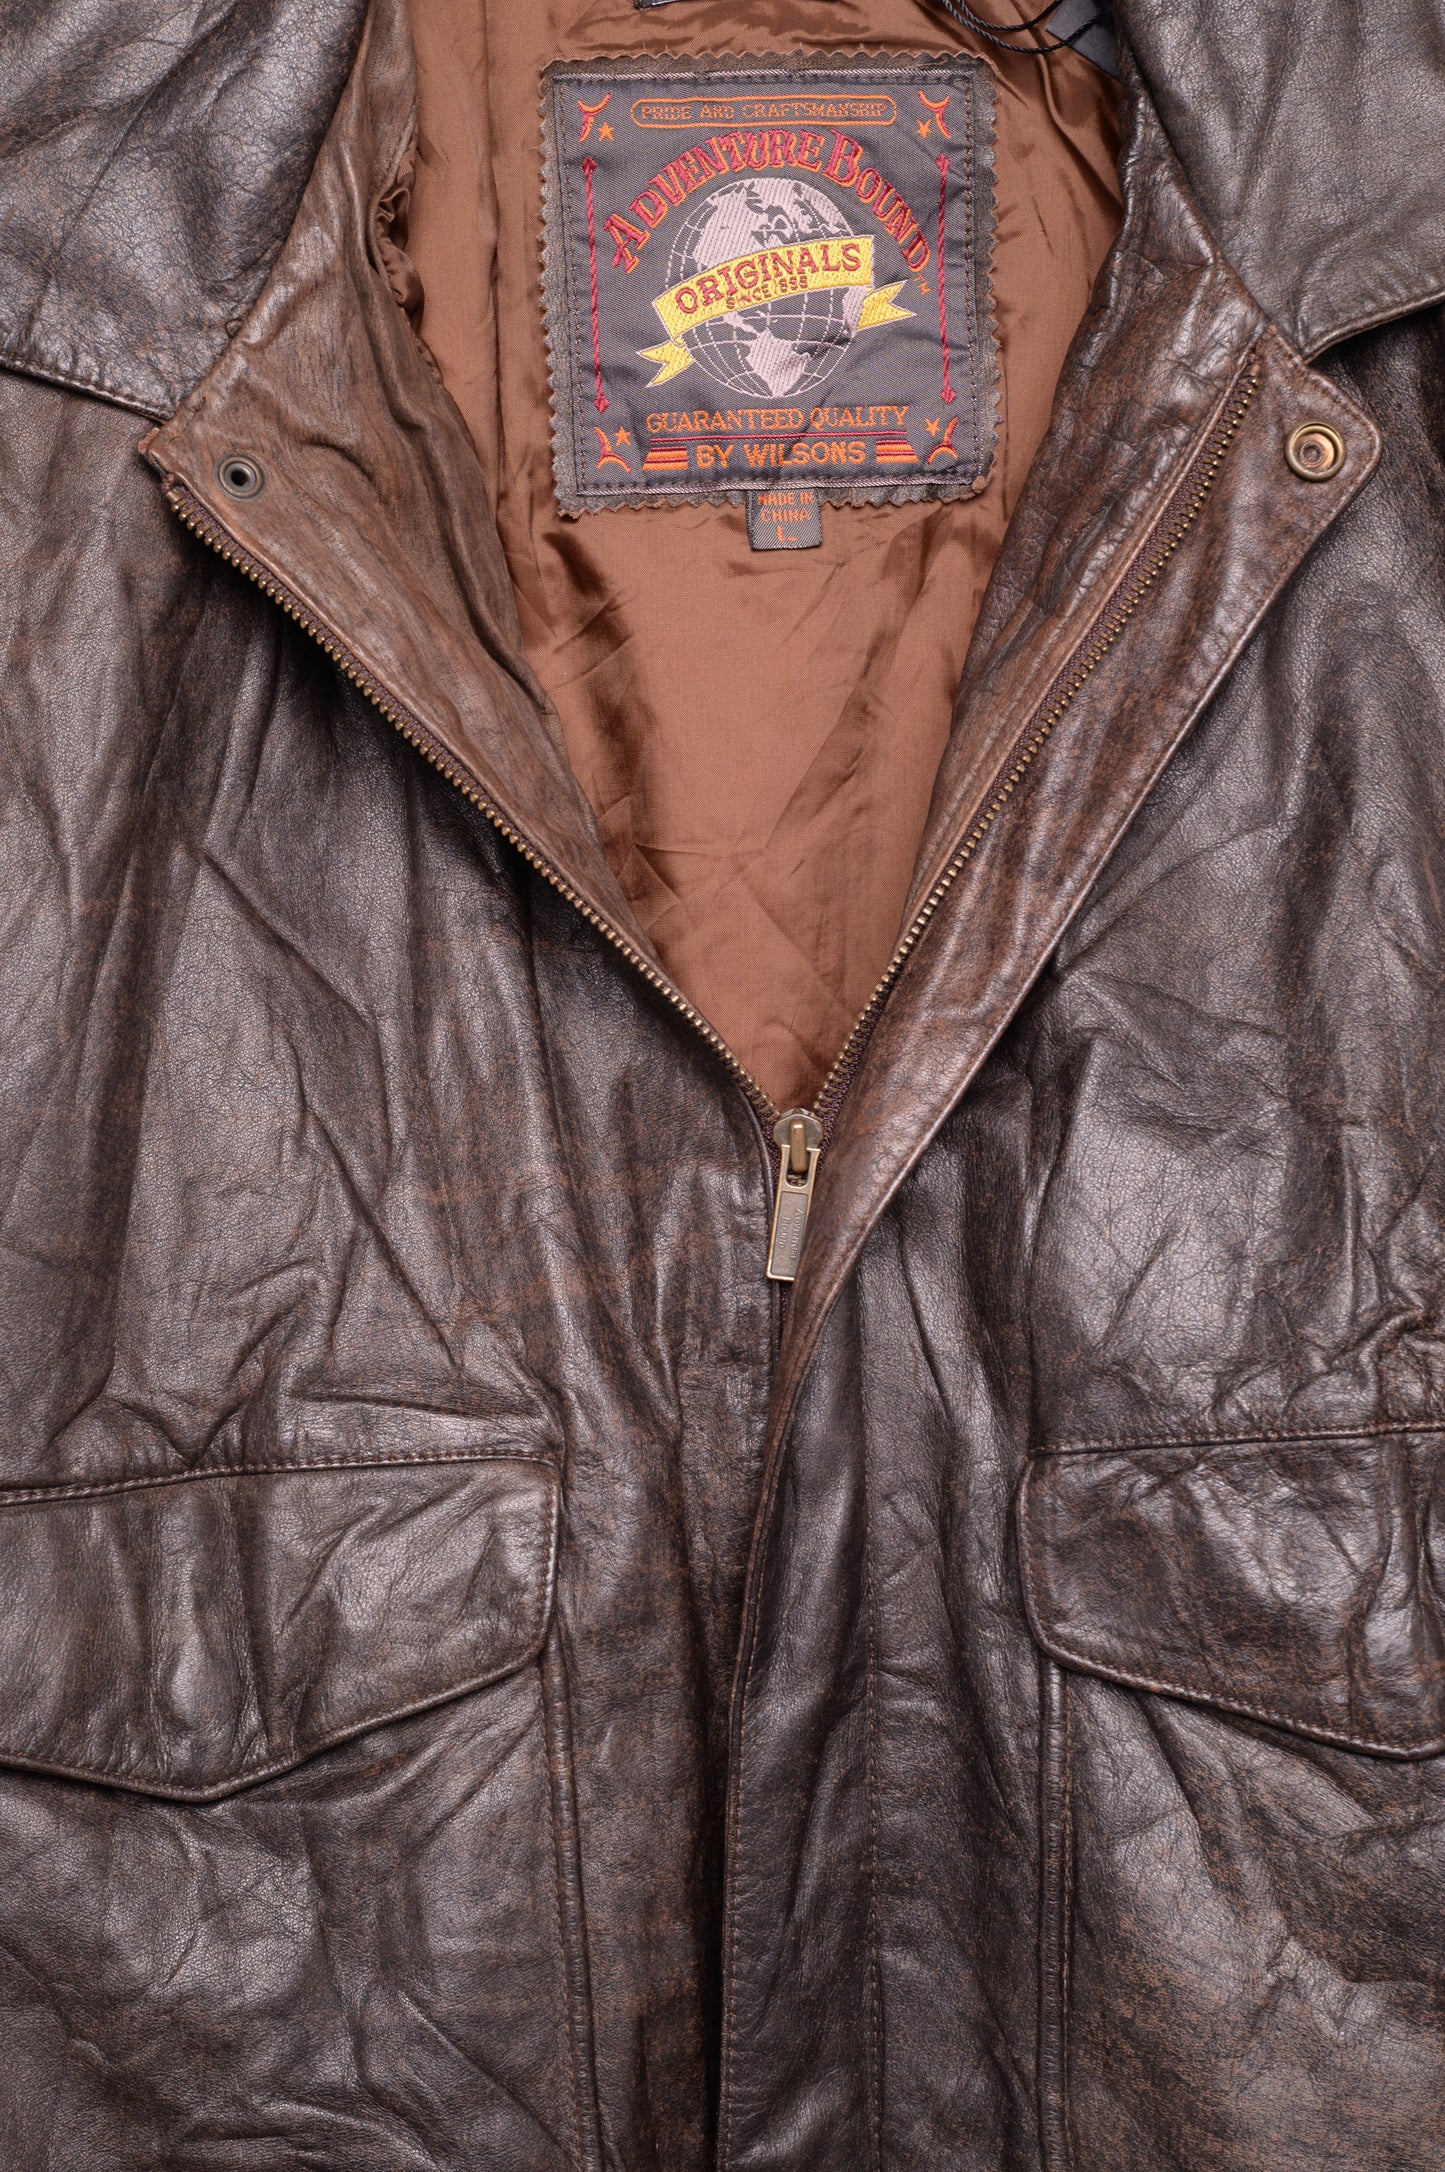 1980s Leather Bomber